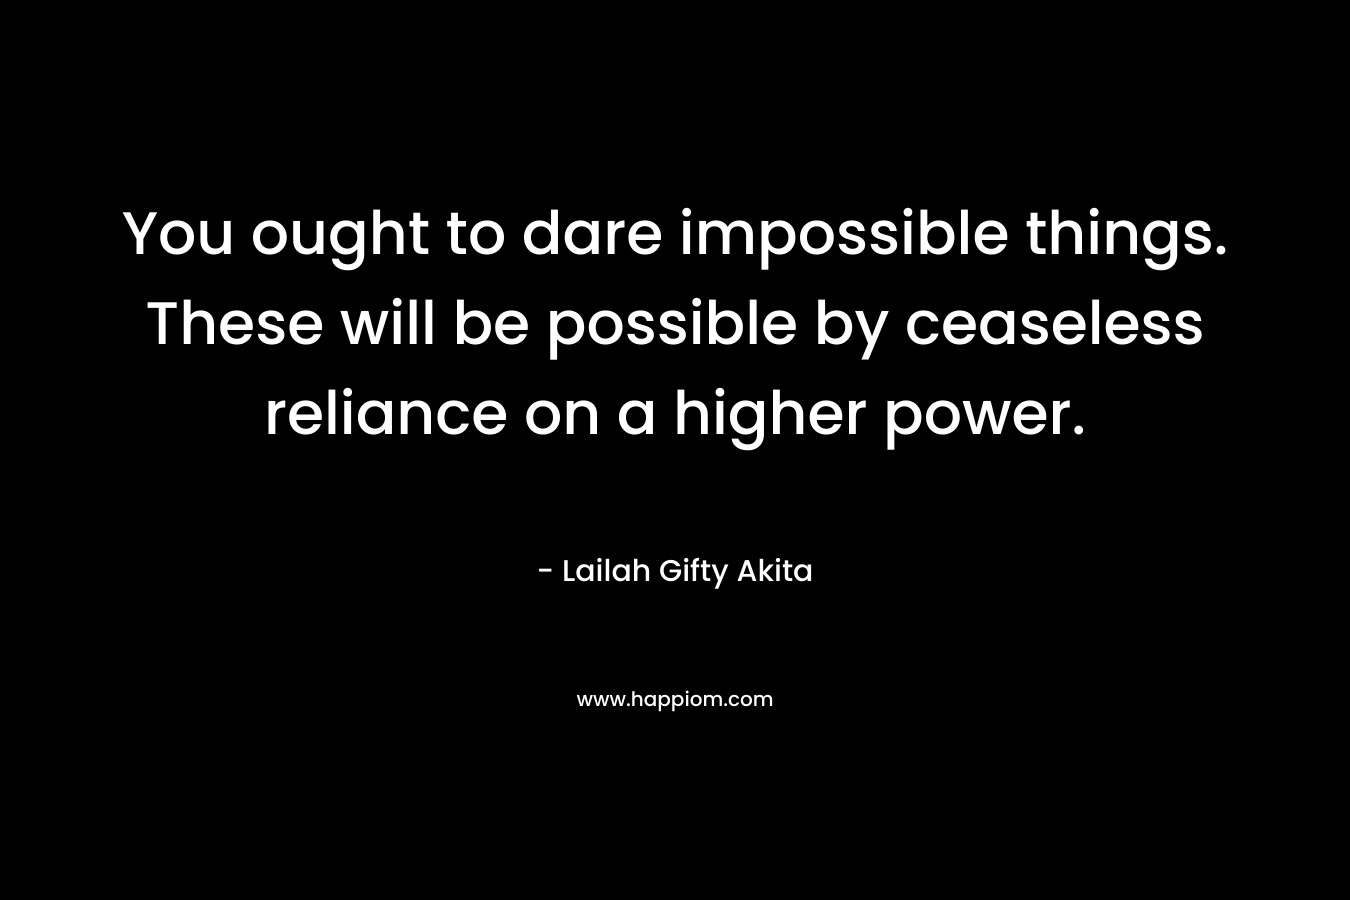 You ought to dare impossible things. These will be possible by ceaseless reliance on a higher power. – Lailah Gifty Akita